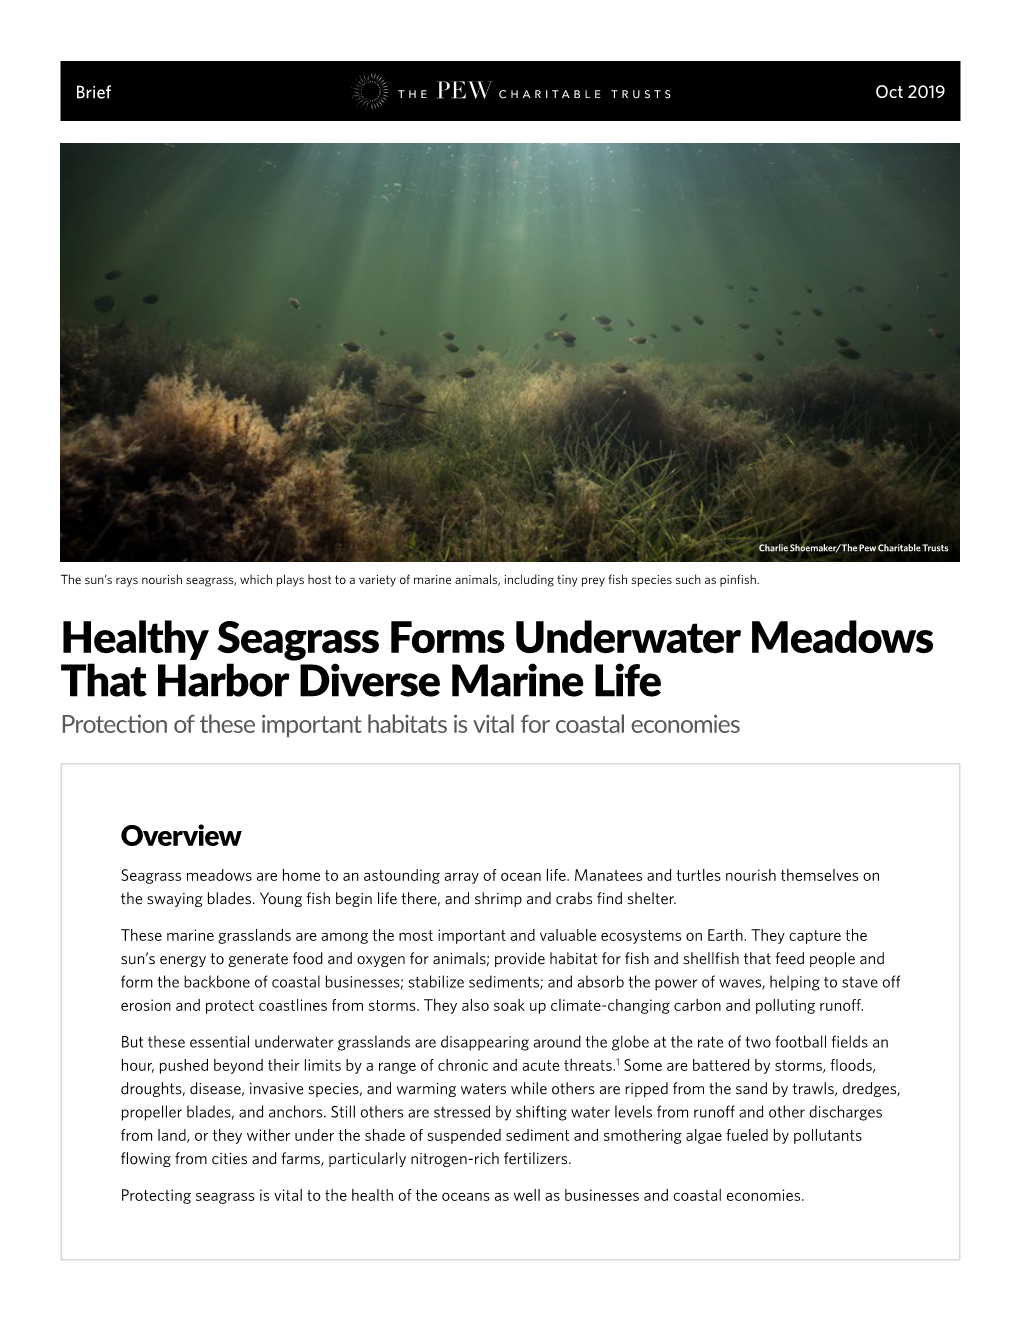 Healthy Seagrass Forms Underwater Meadows That Harbor Diverse Marine Life Protection of These Important Habitats Is Vital for Coastal Economies